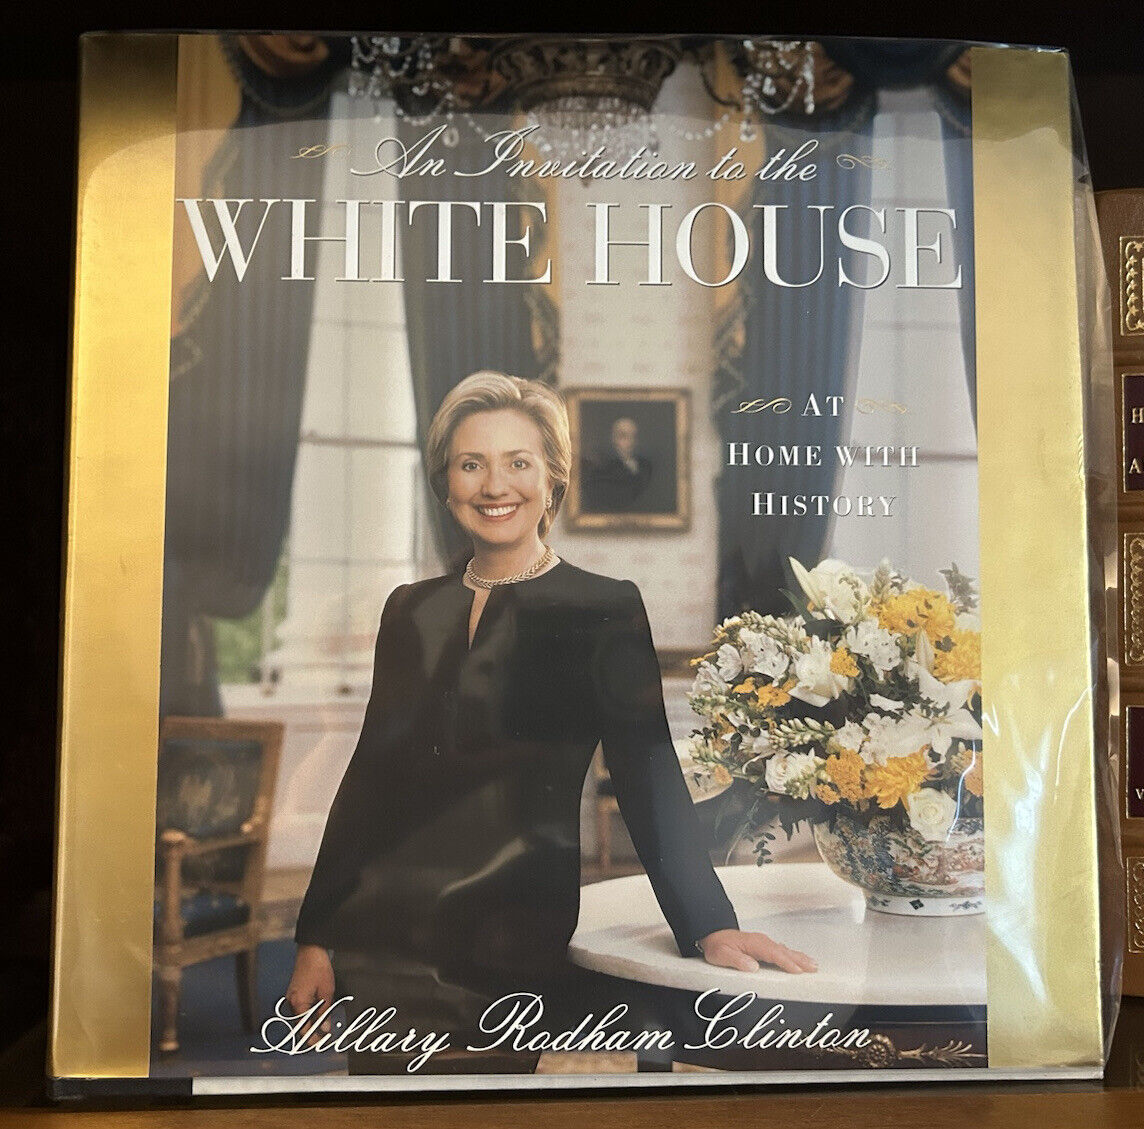 Hillary Rodham Clinton Signed An Invitation To The White House Autographed